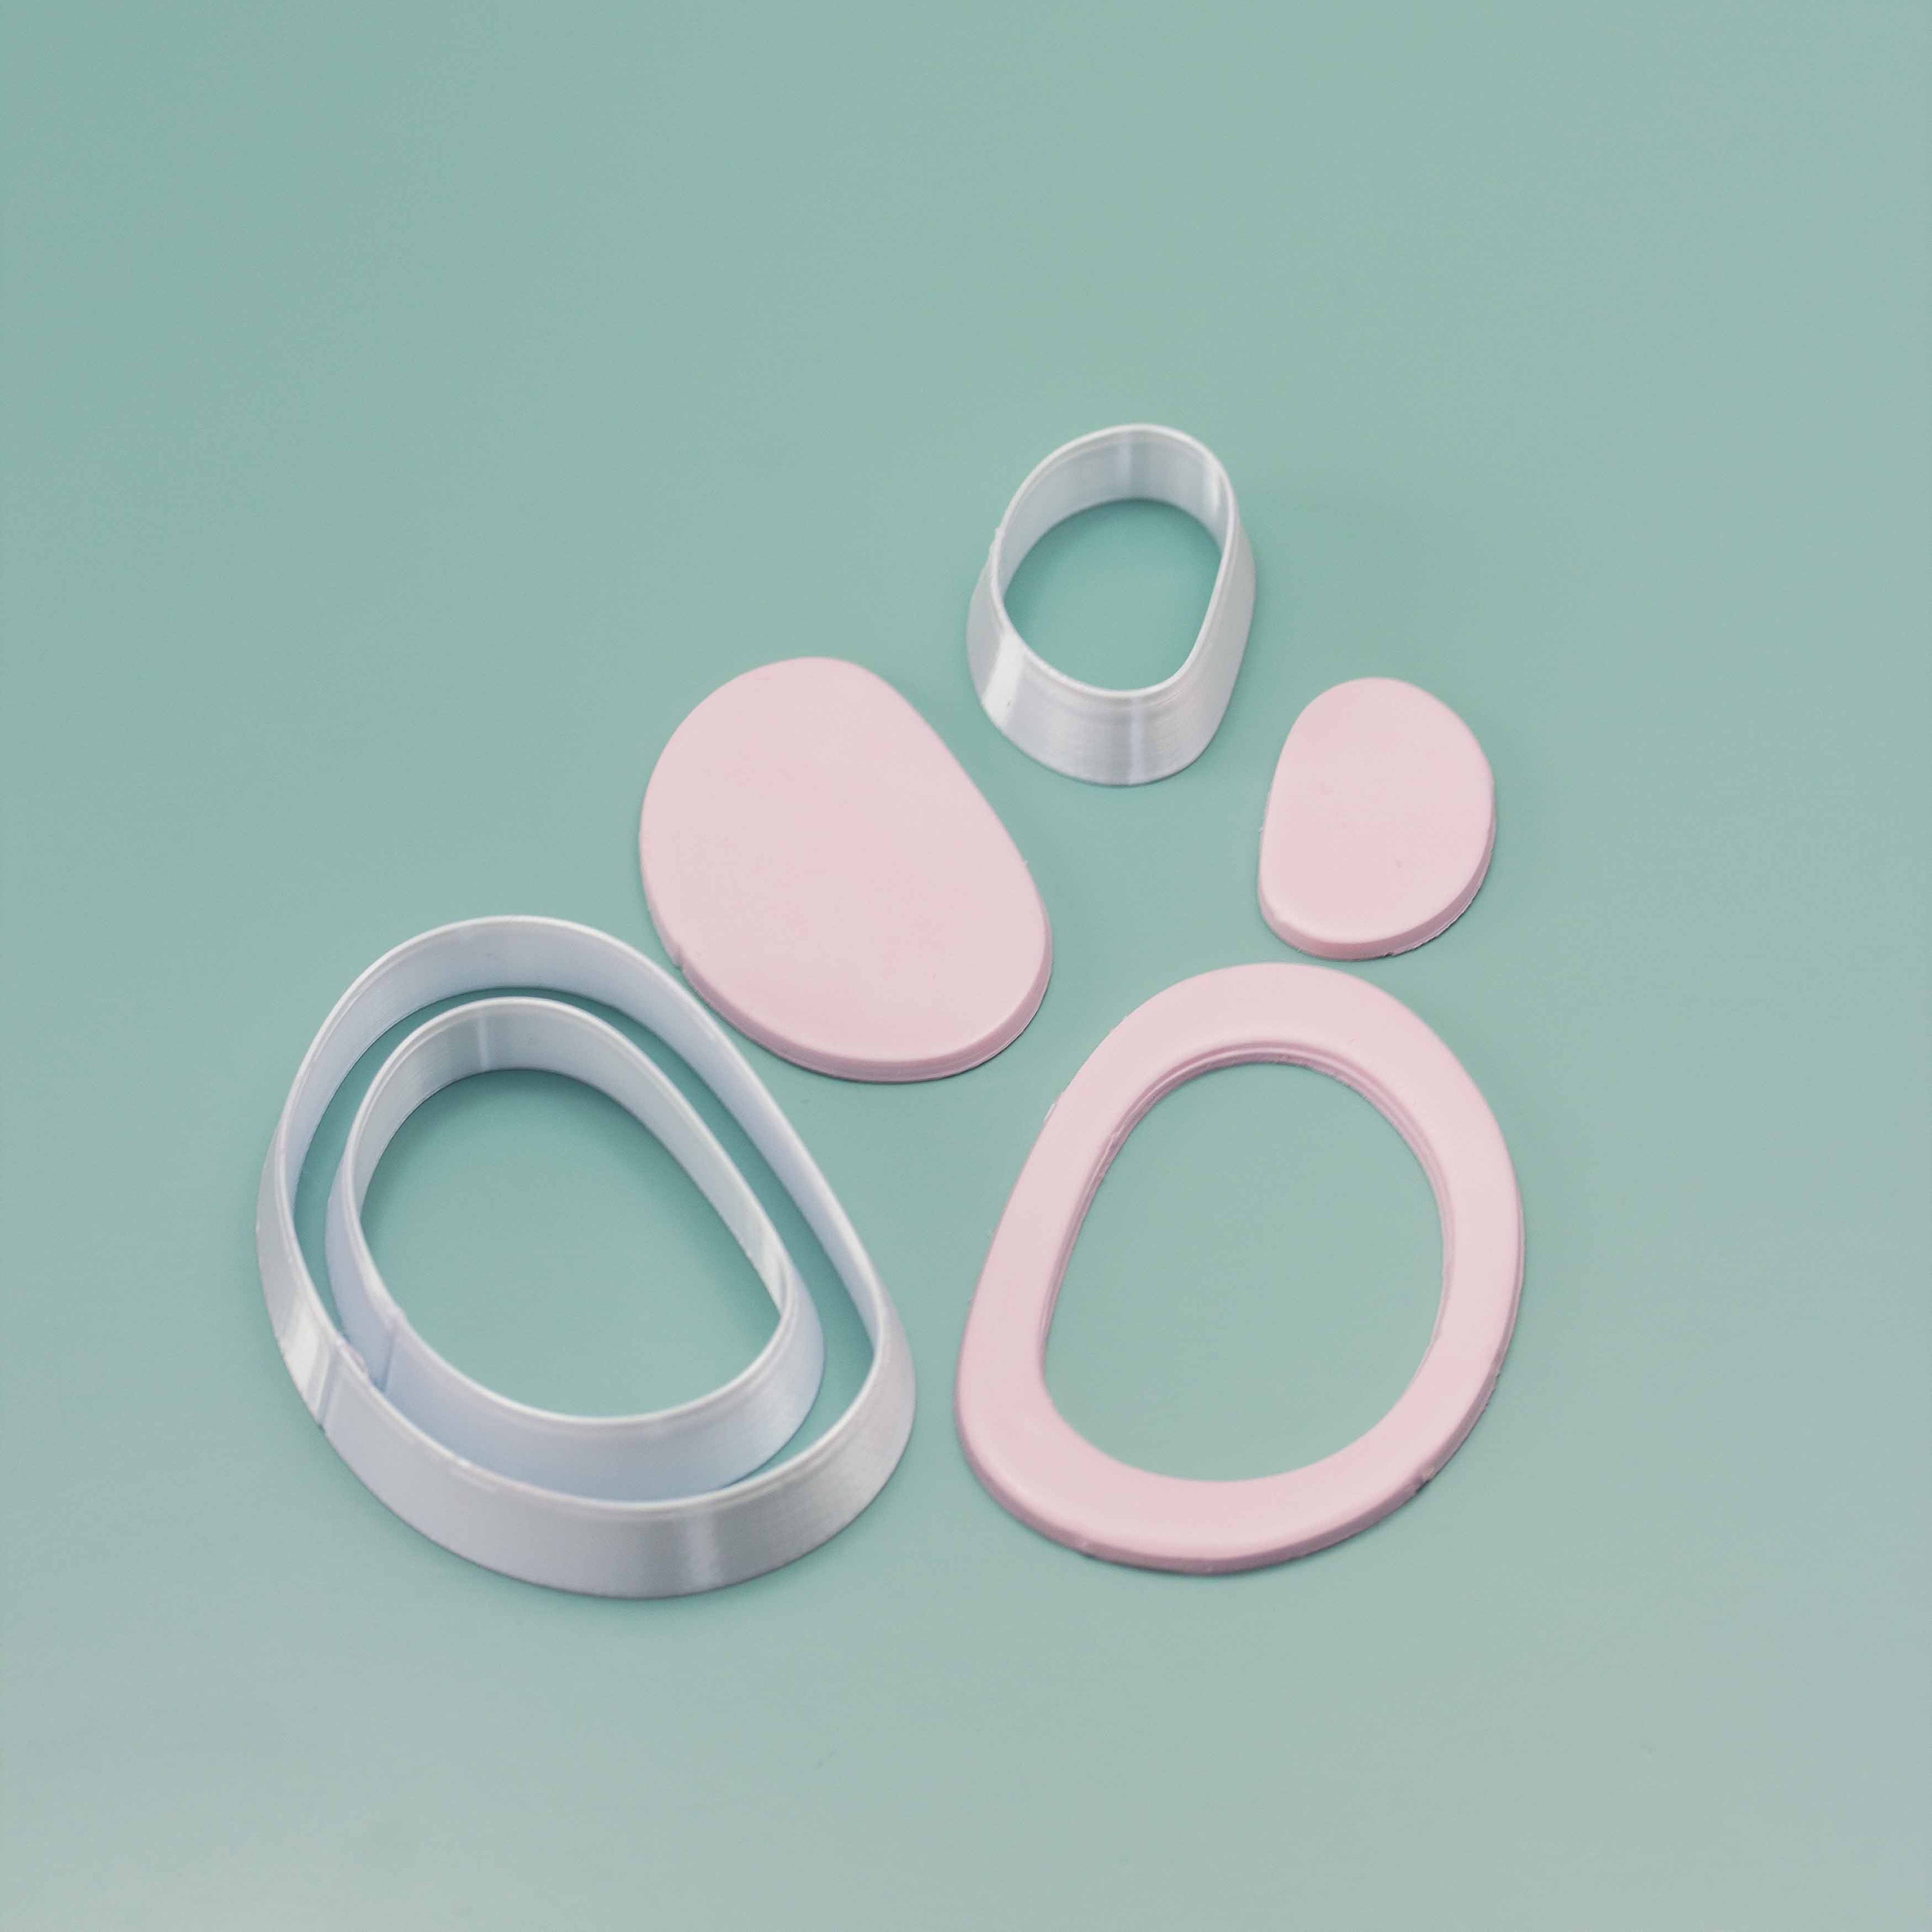 Organic Circle Polymer Clay Cutters Set - Claytime Tools